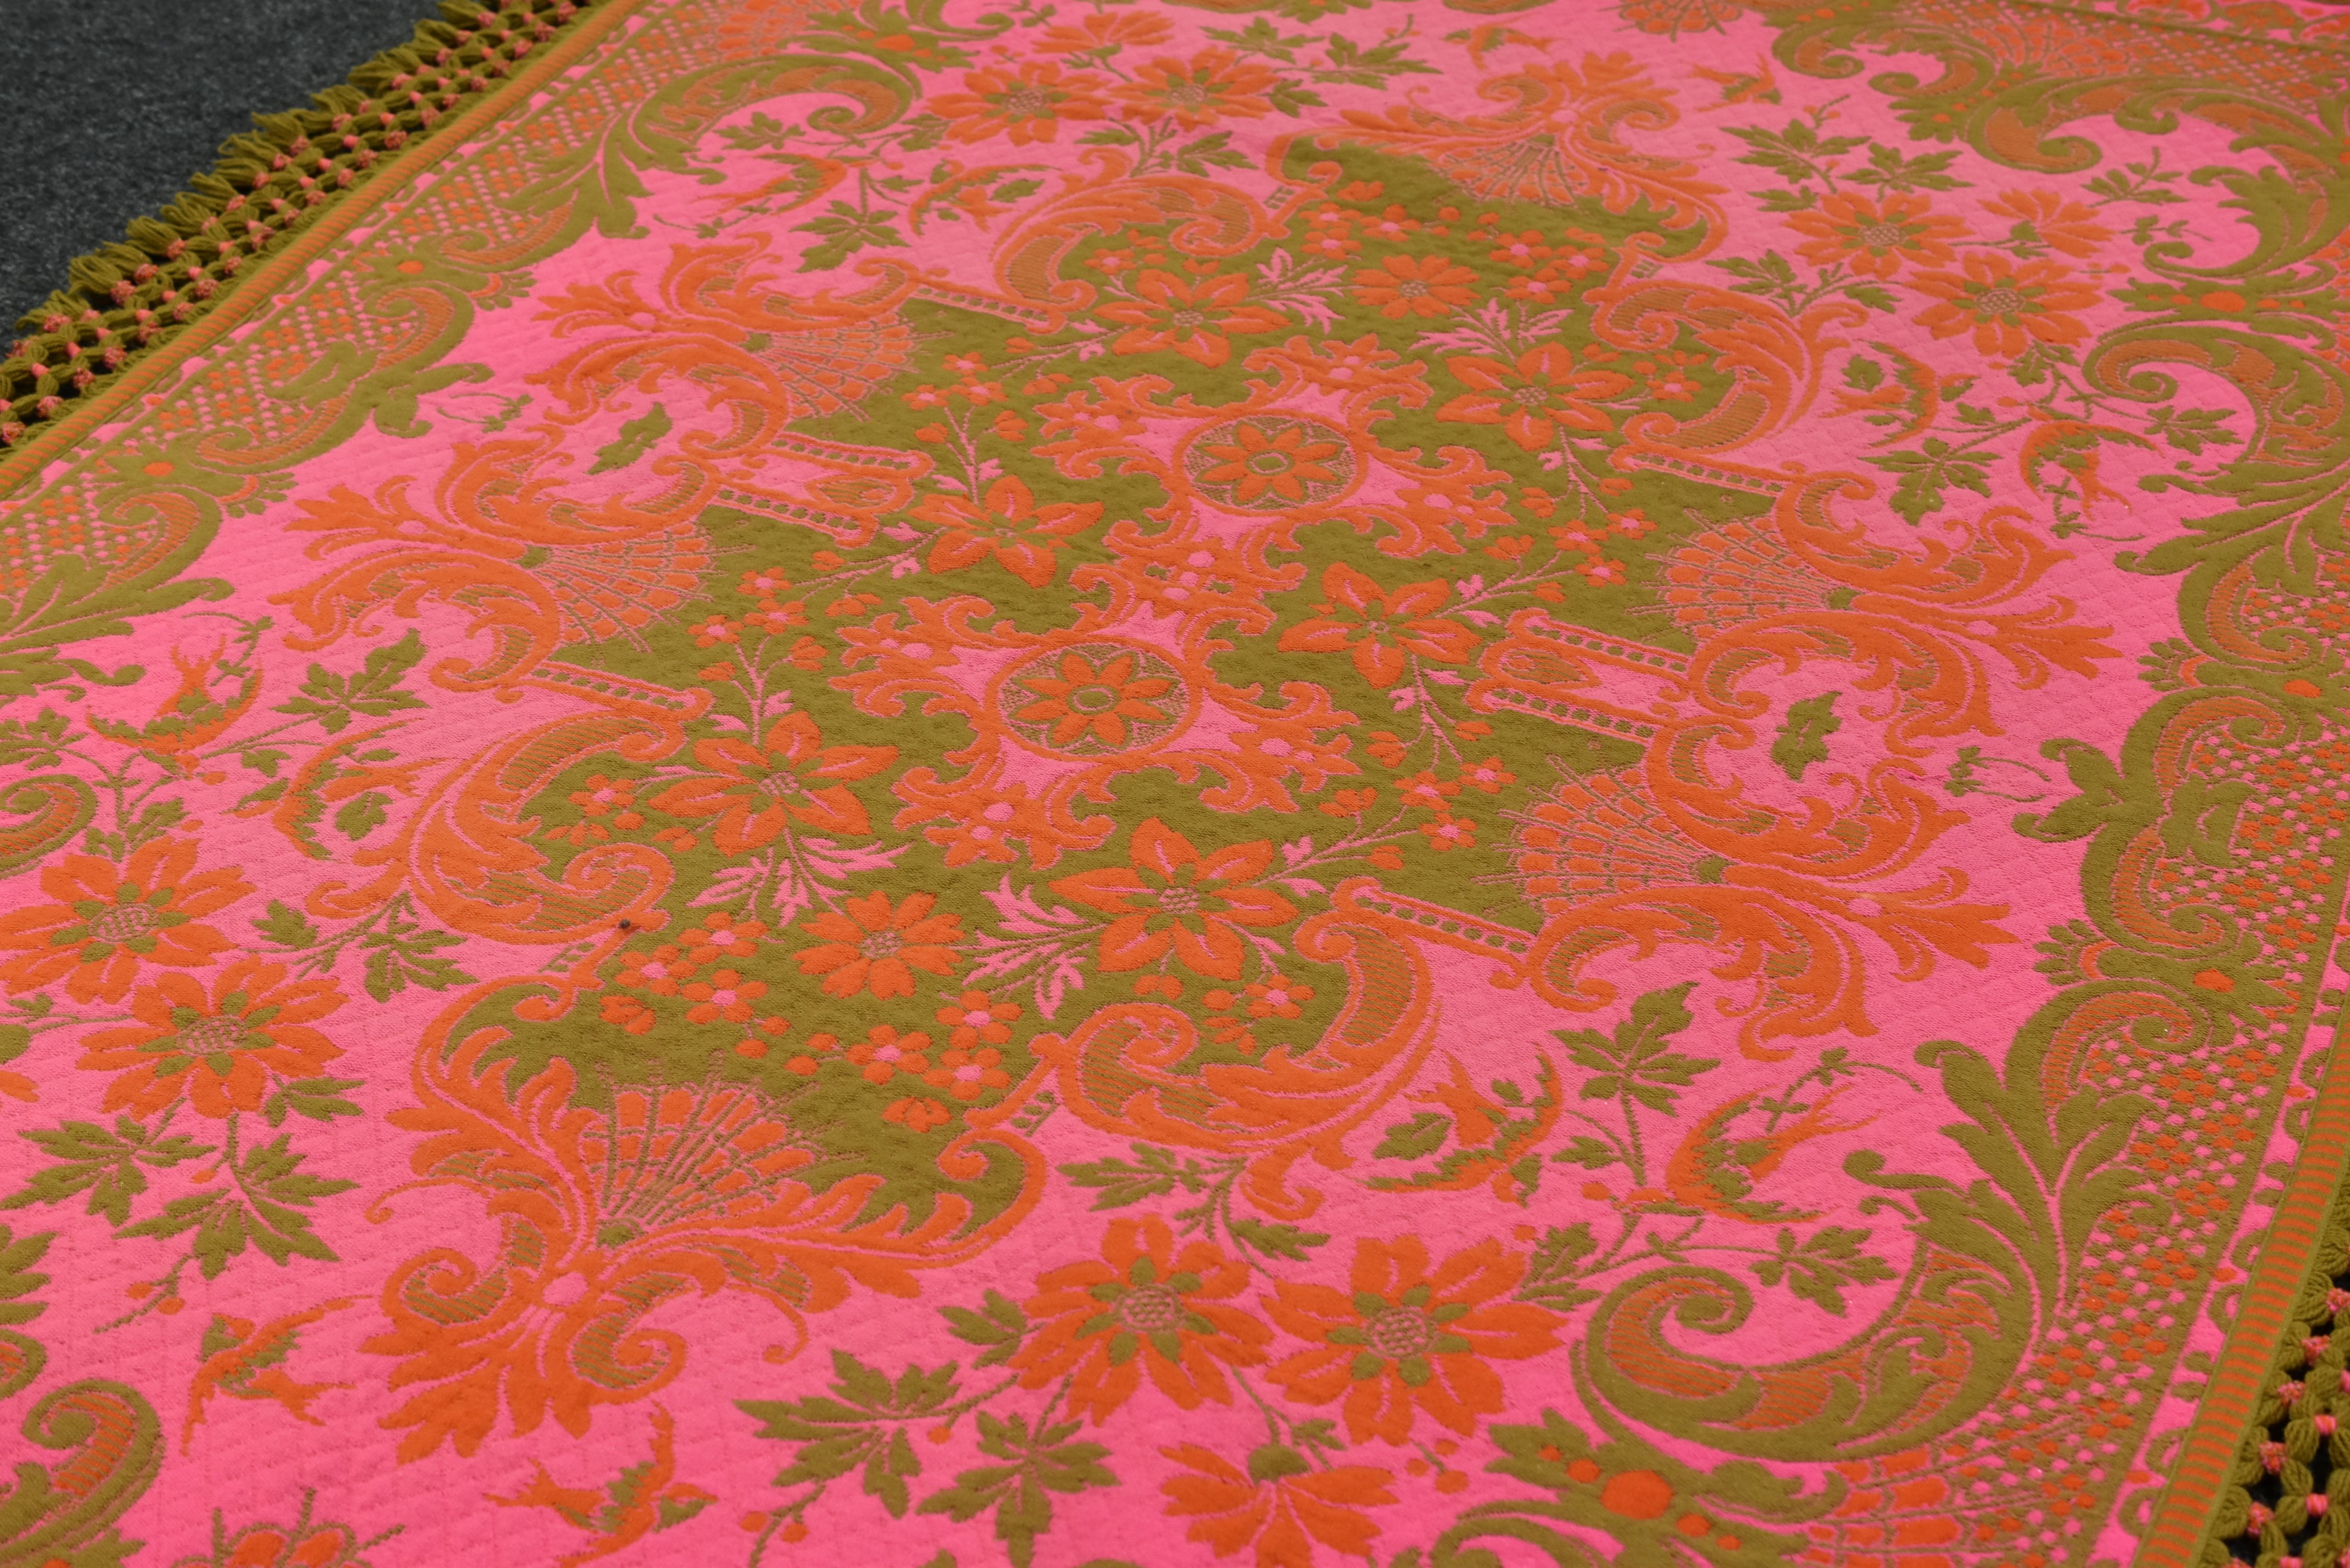 A SPANISH 'CASA PUPO' WOOL BLANKET in bright pink and green, 302 x 185cms - Image 2 of 3